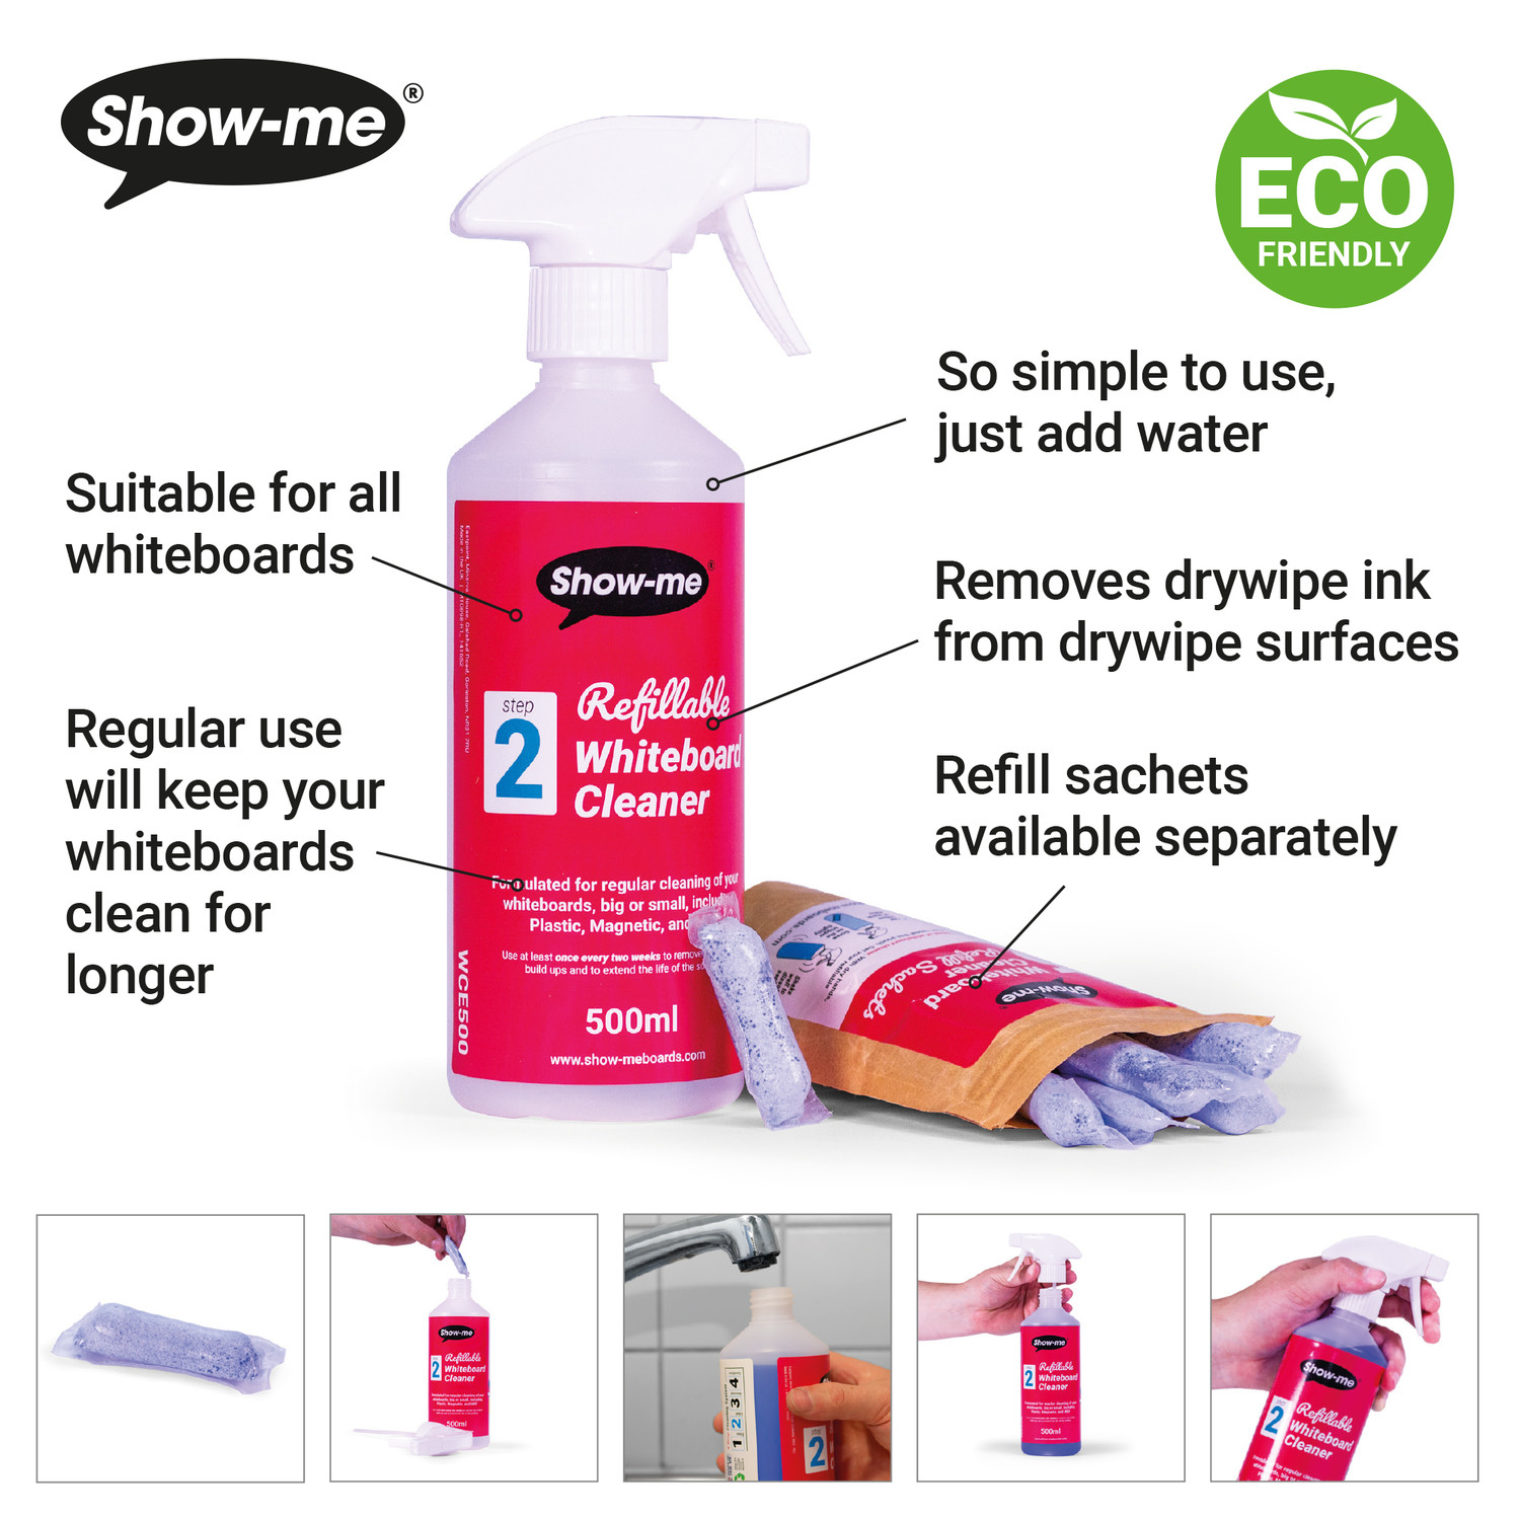 Show-me Whiteboard Cleaner Info